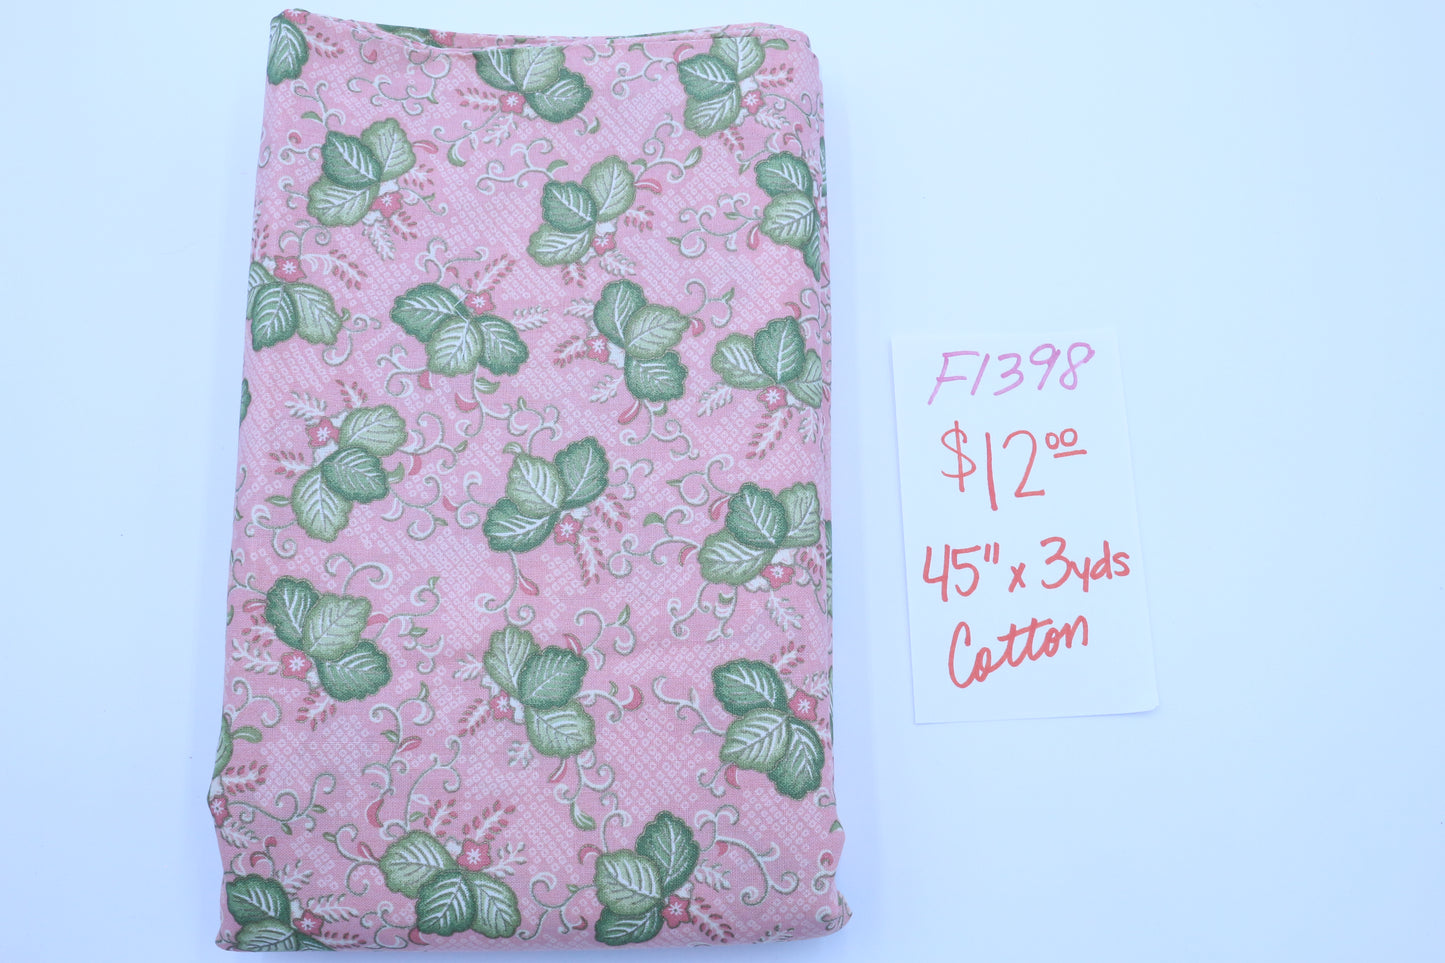 Vintage Pink with Green Leaves Cotton Fabric 45" x 3 yds